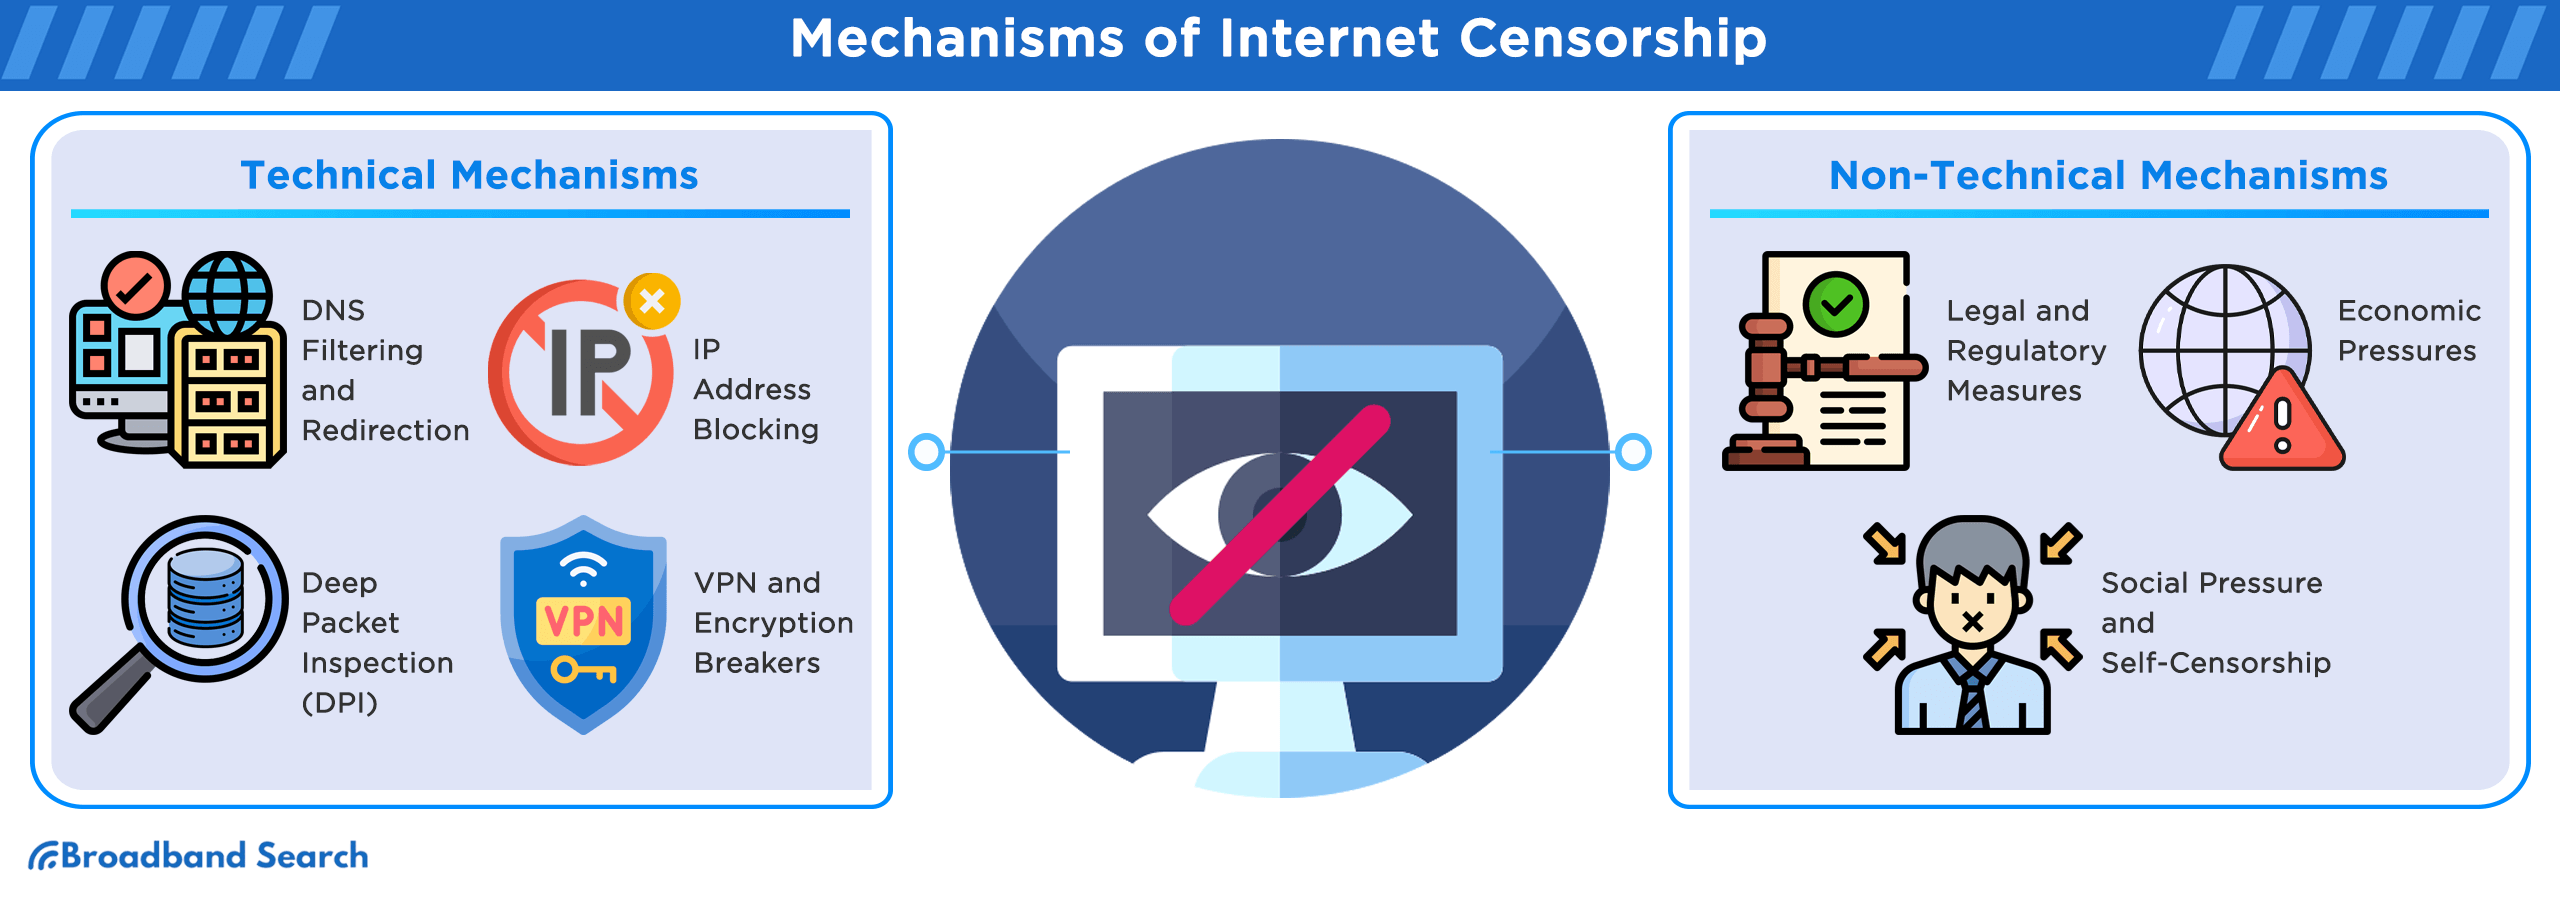 The technical and non-technical mechanisms of internet censorship